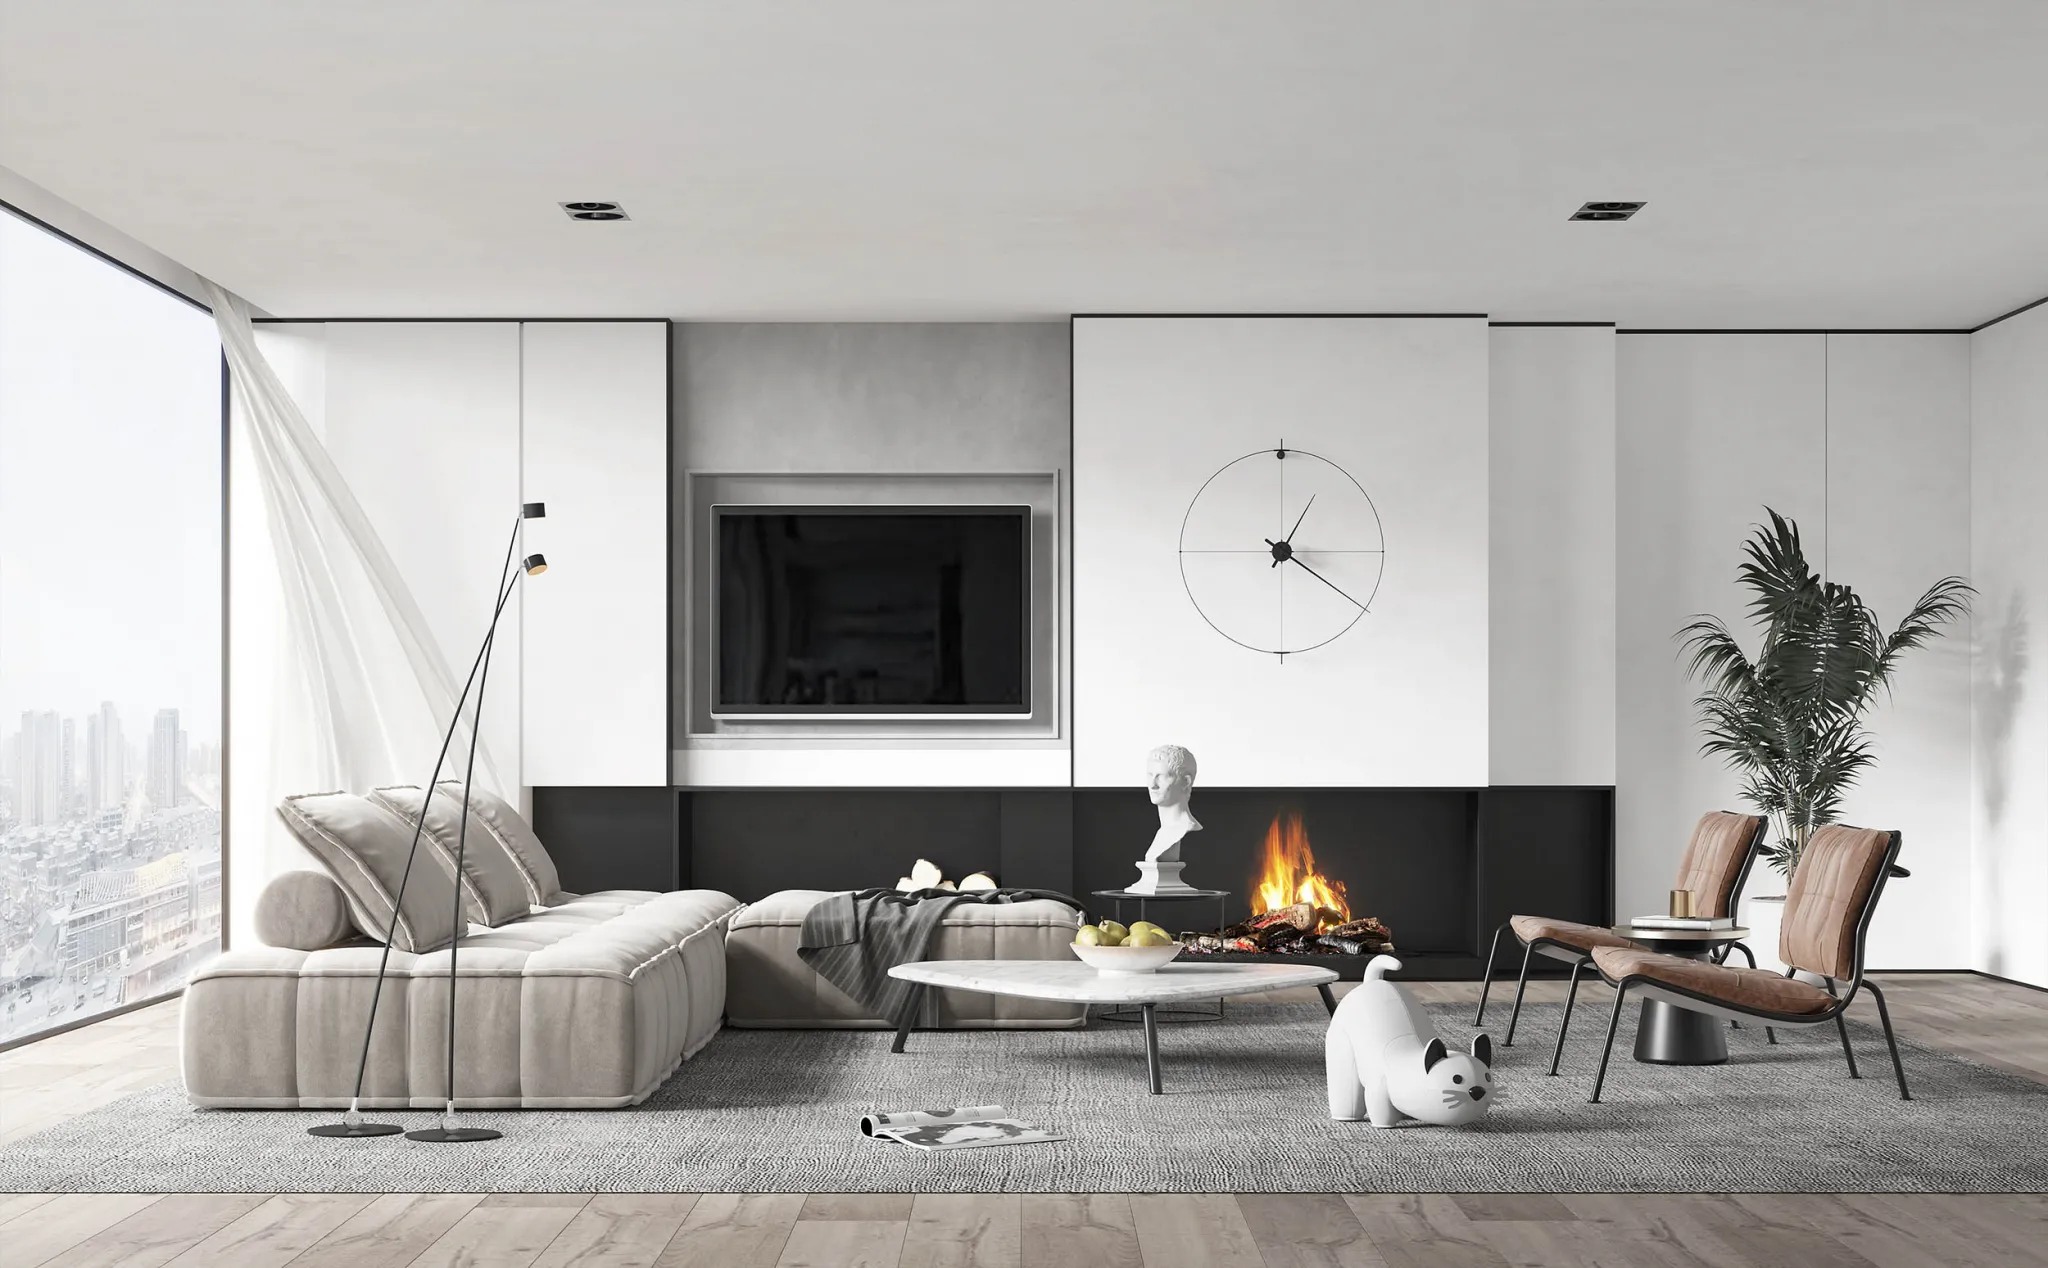 HOUSE SPACE 3D SCENES – LIVING ROOM – 0099